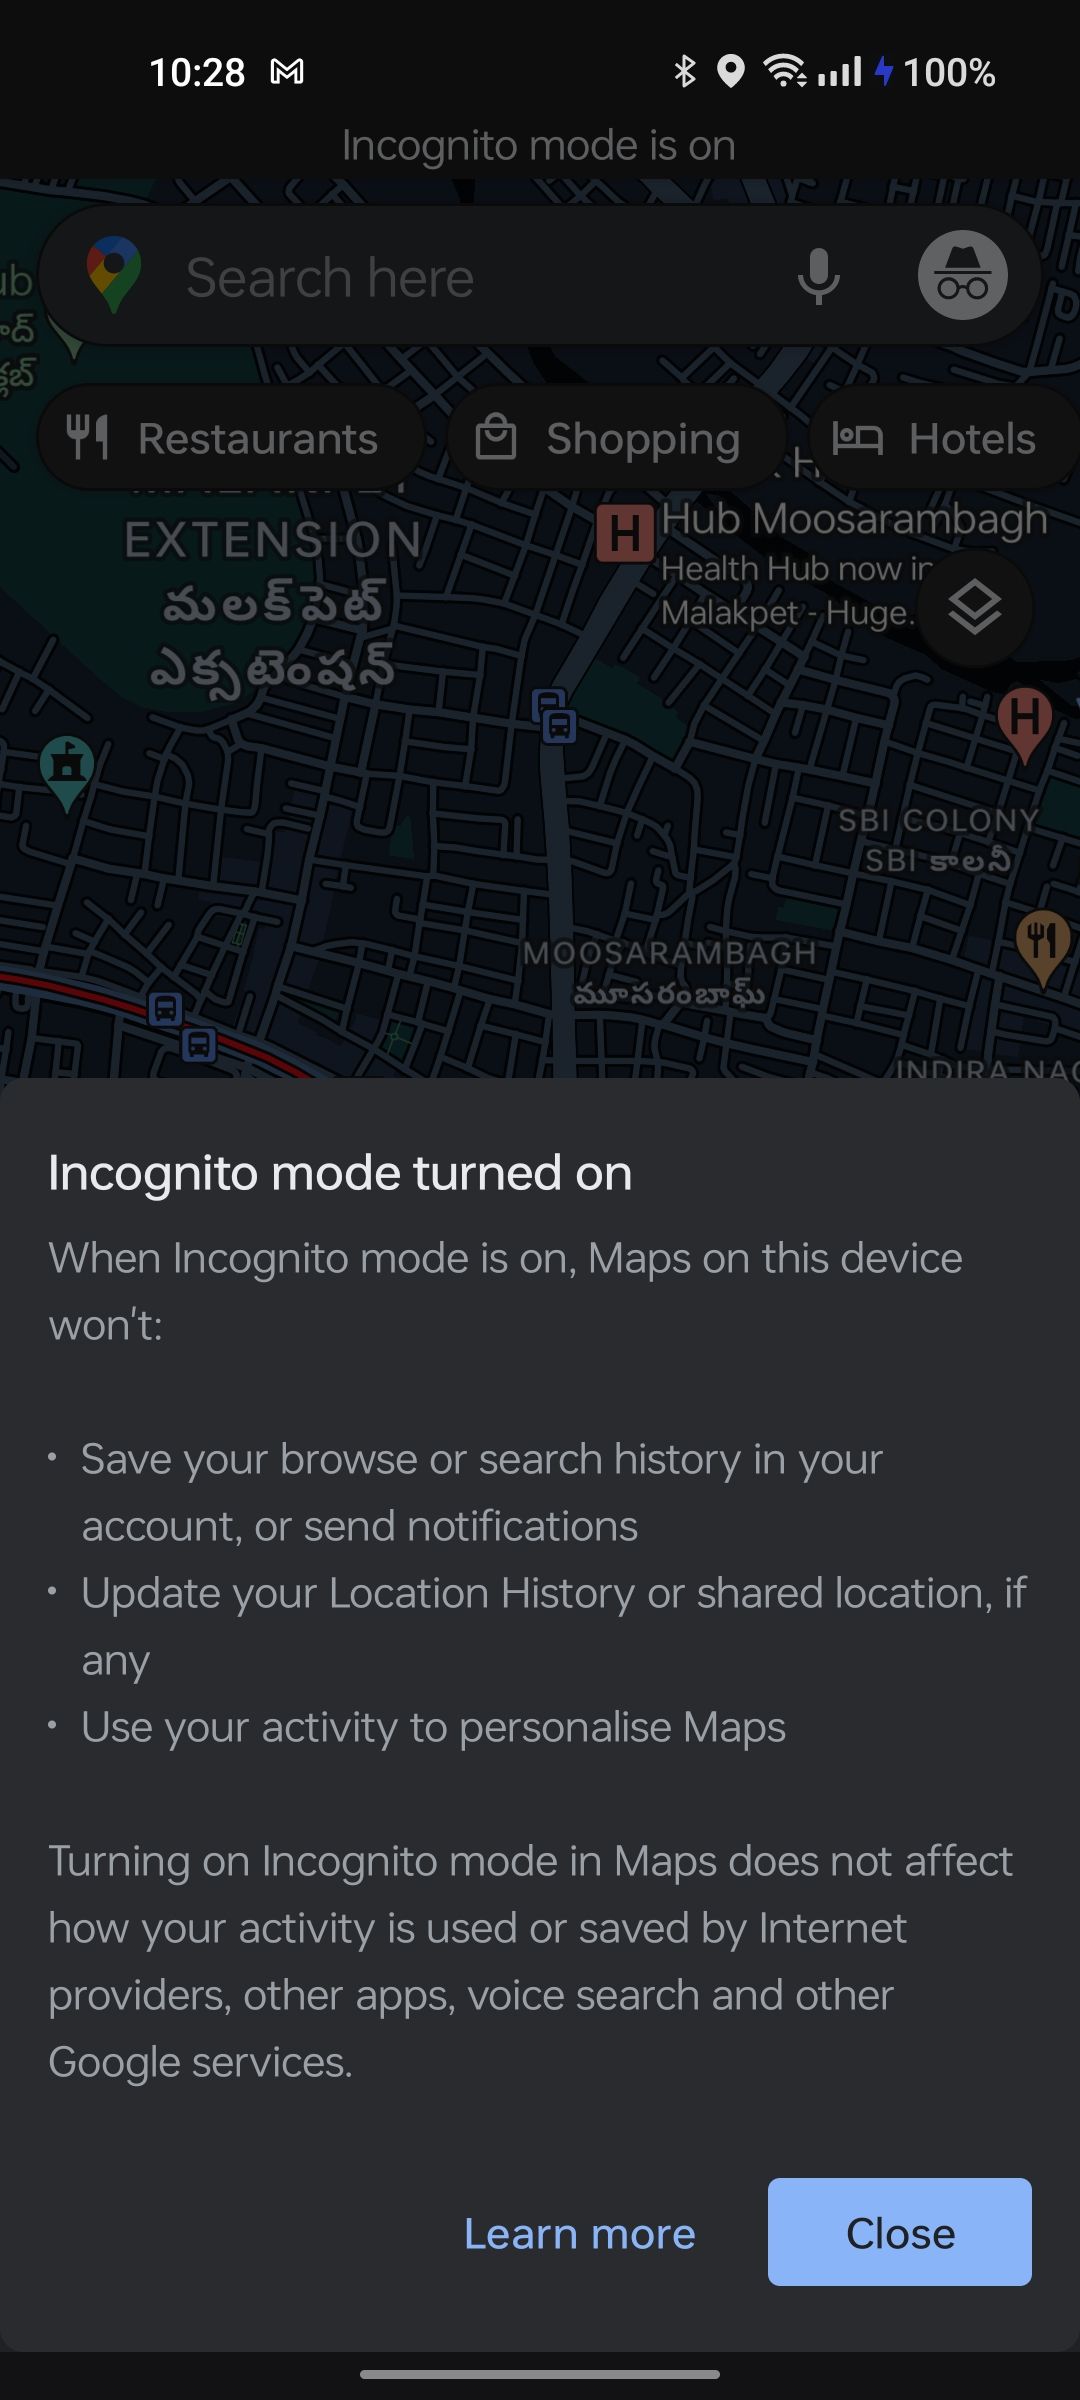 Incognito mode on Maps in action